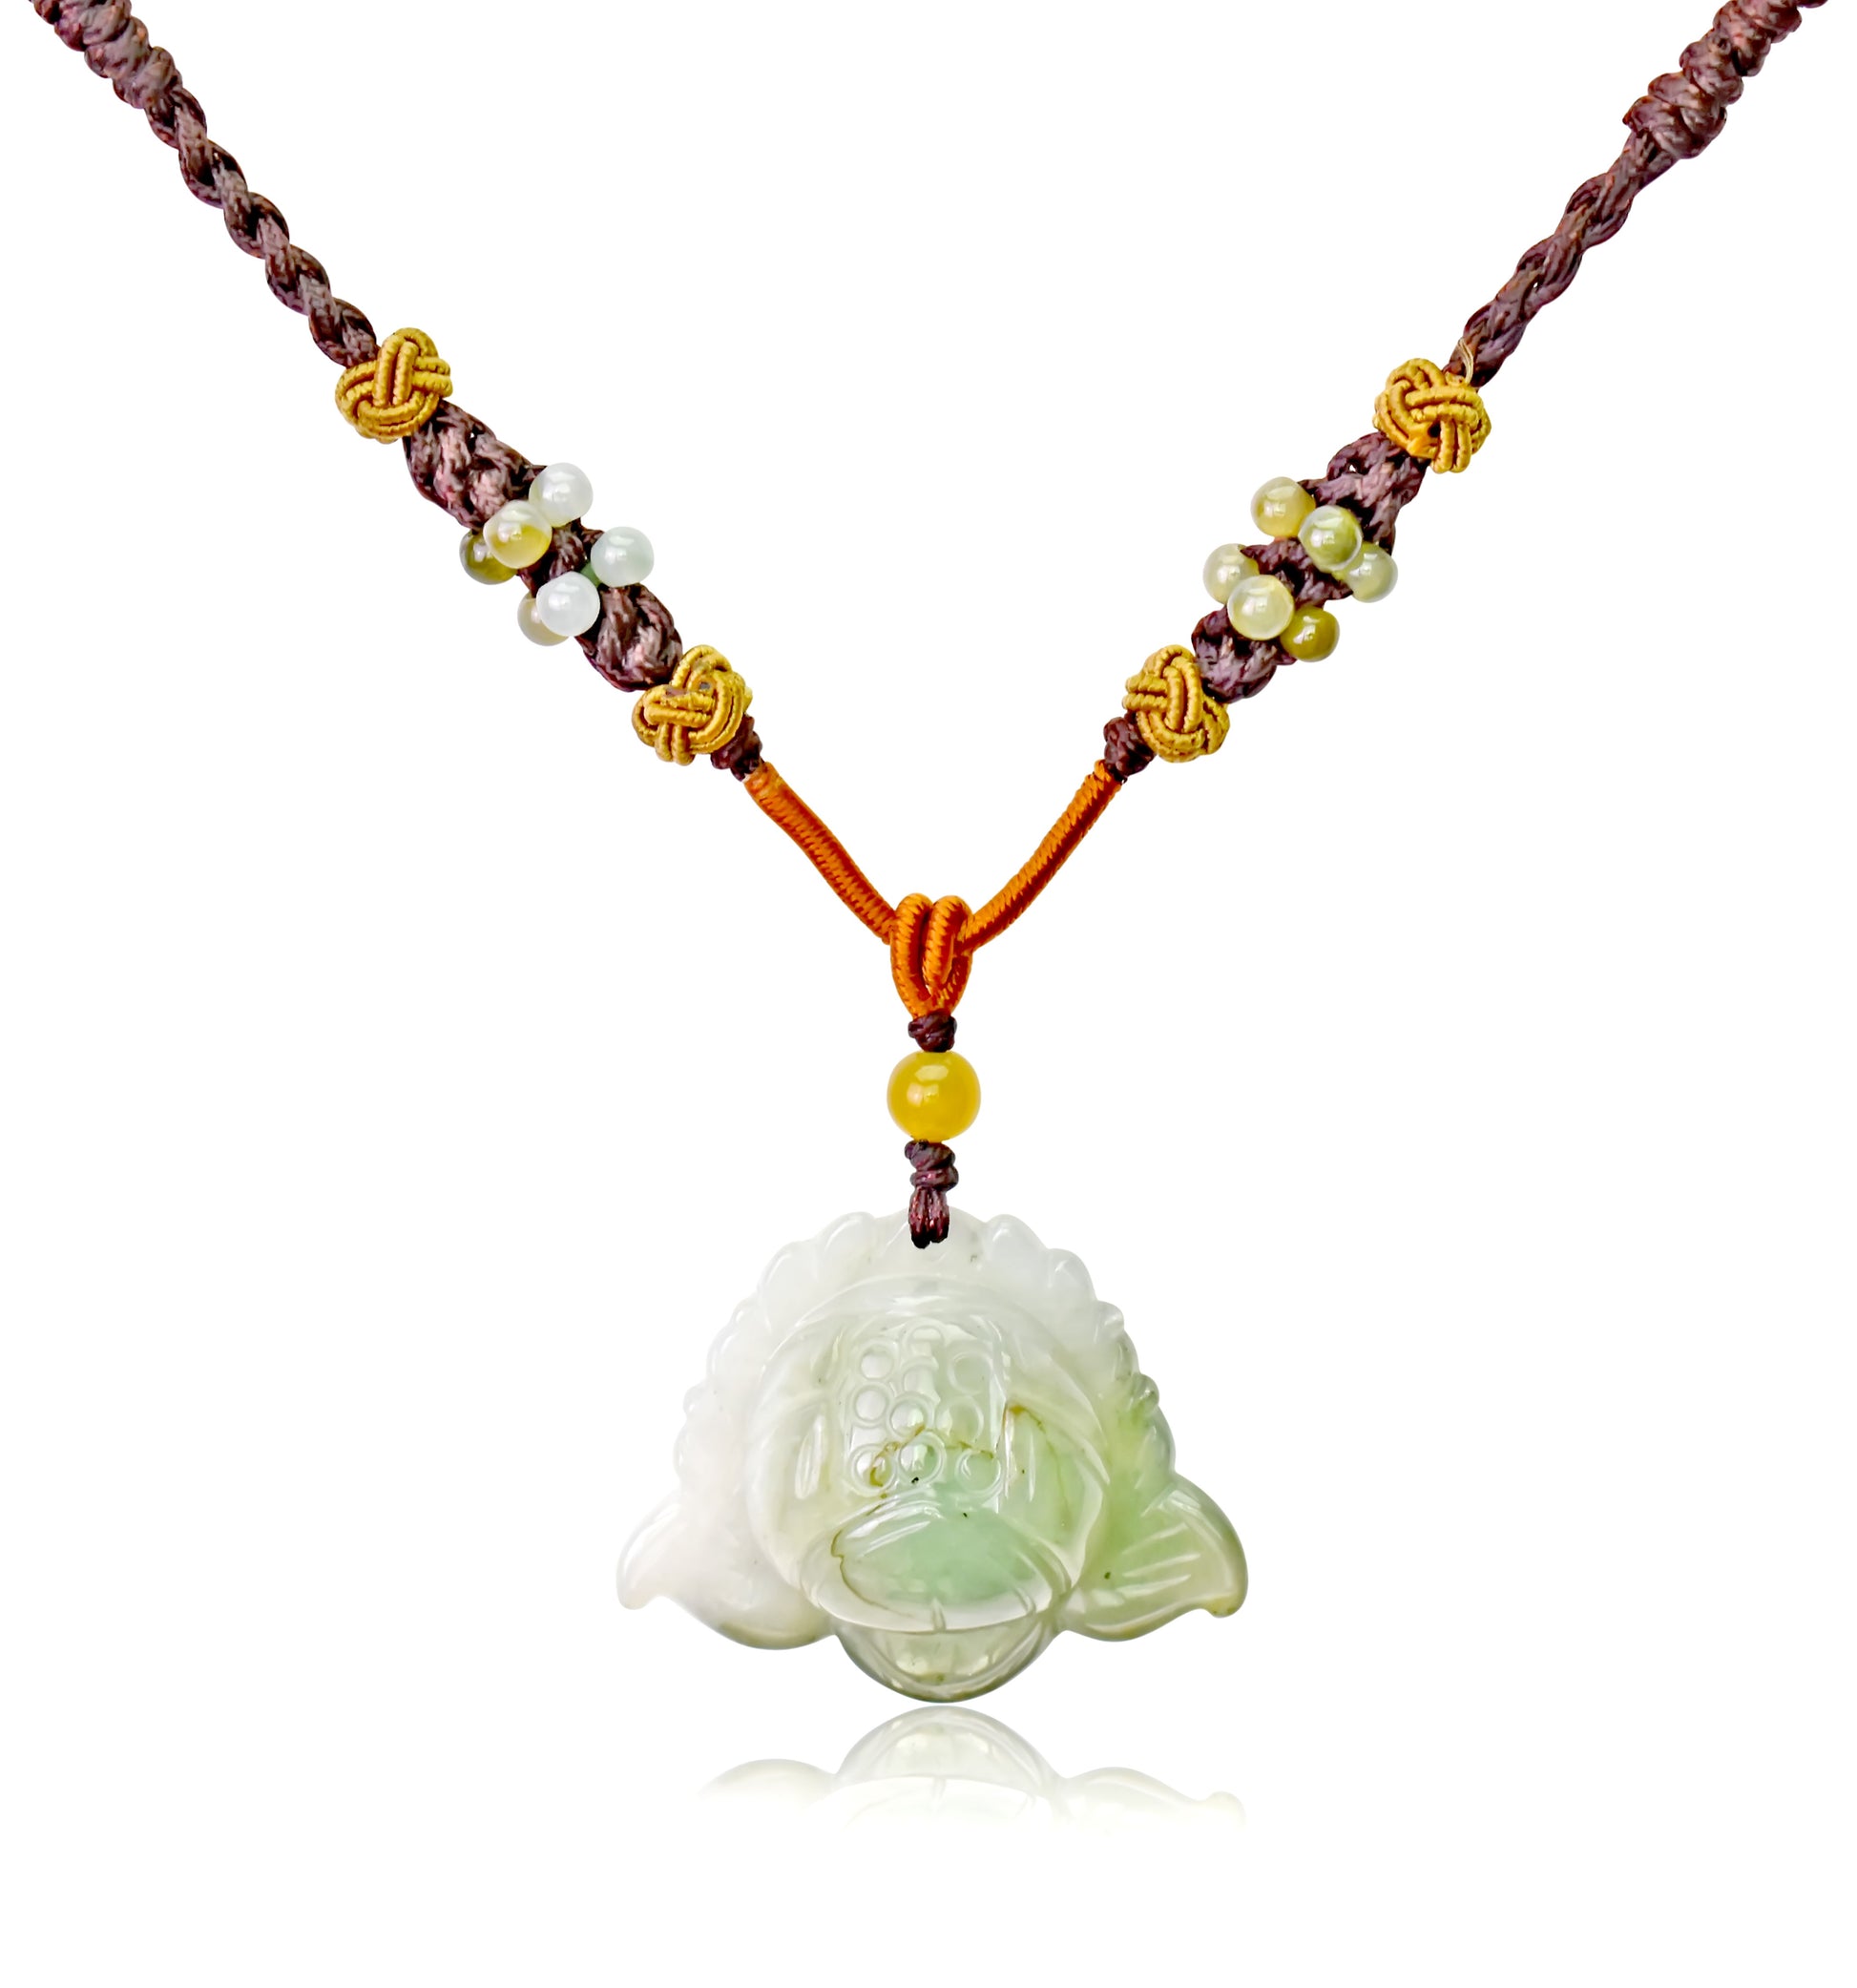 Purity in Your Life with Lotus Flower Jade Necklace made with Brown Cord